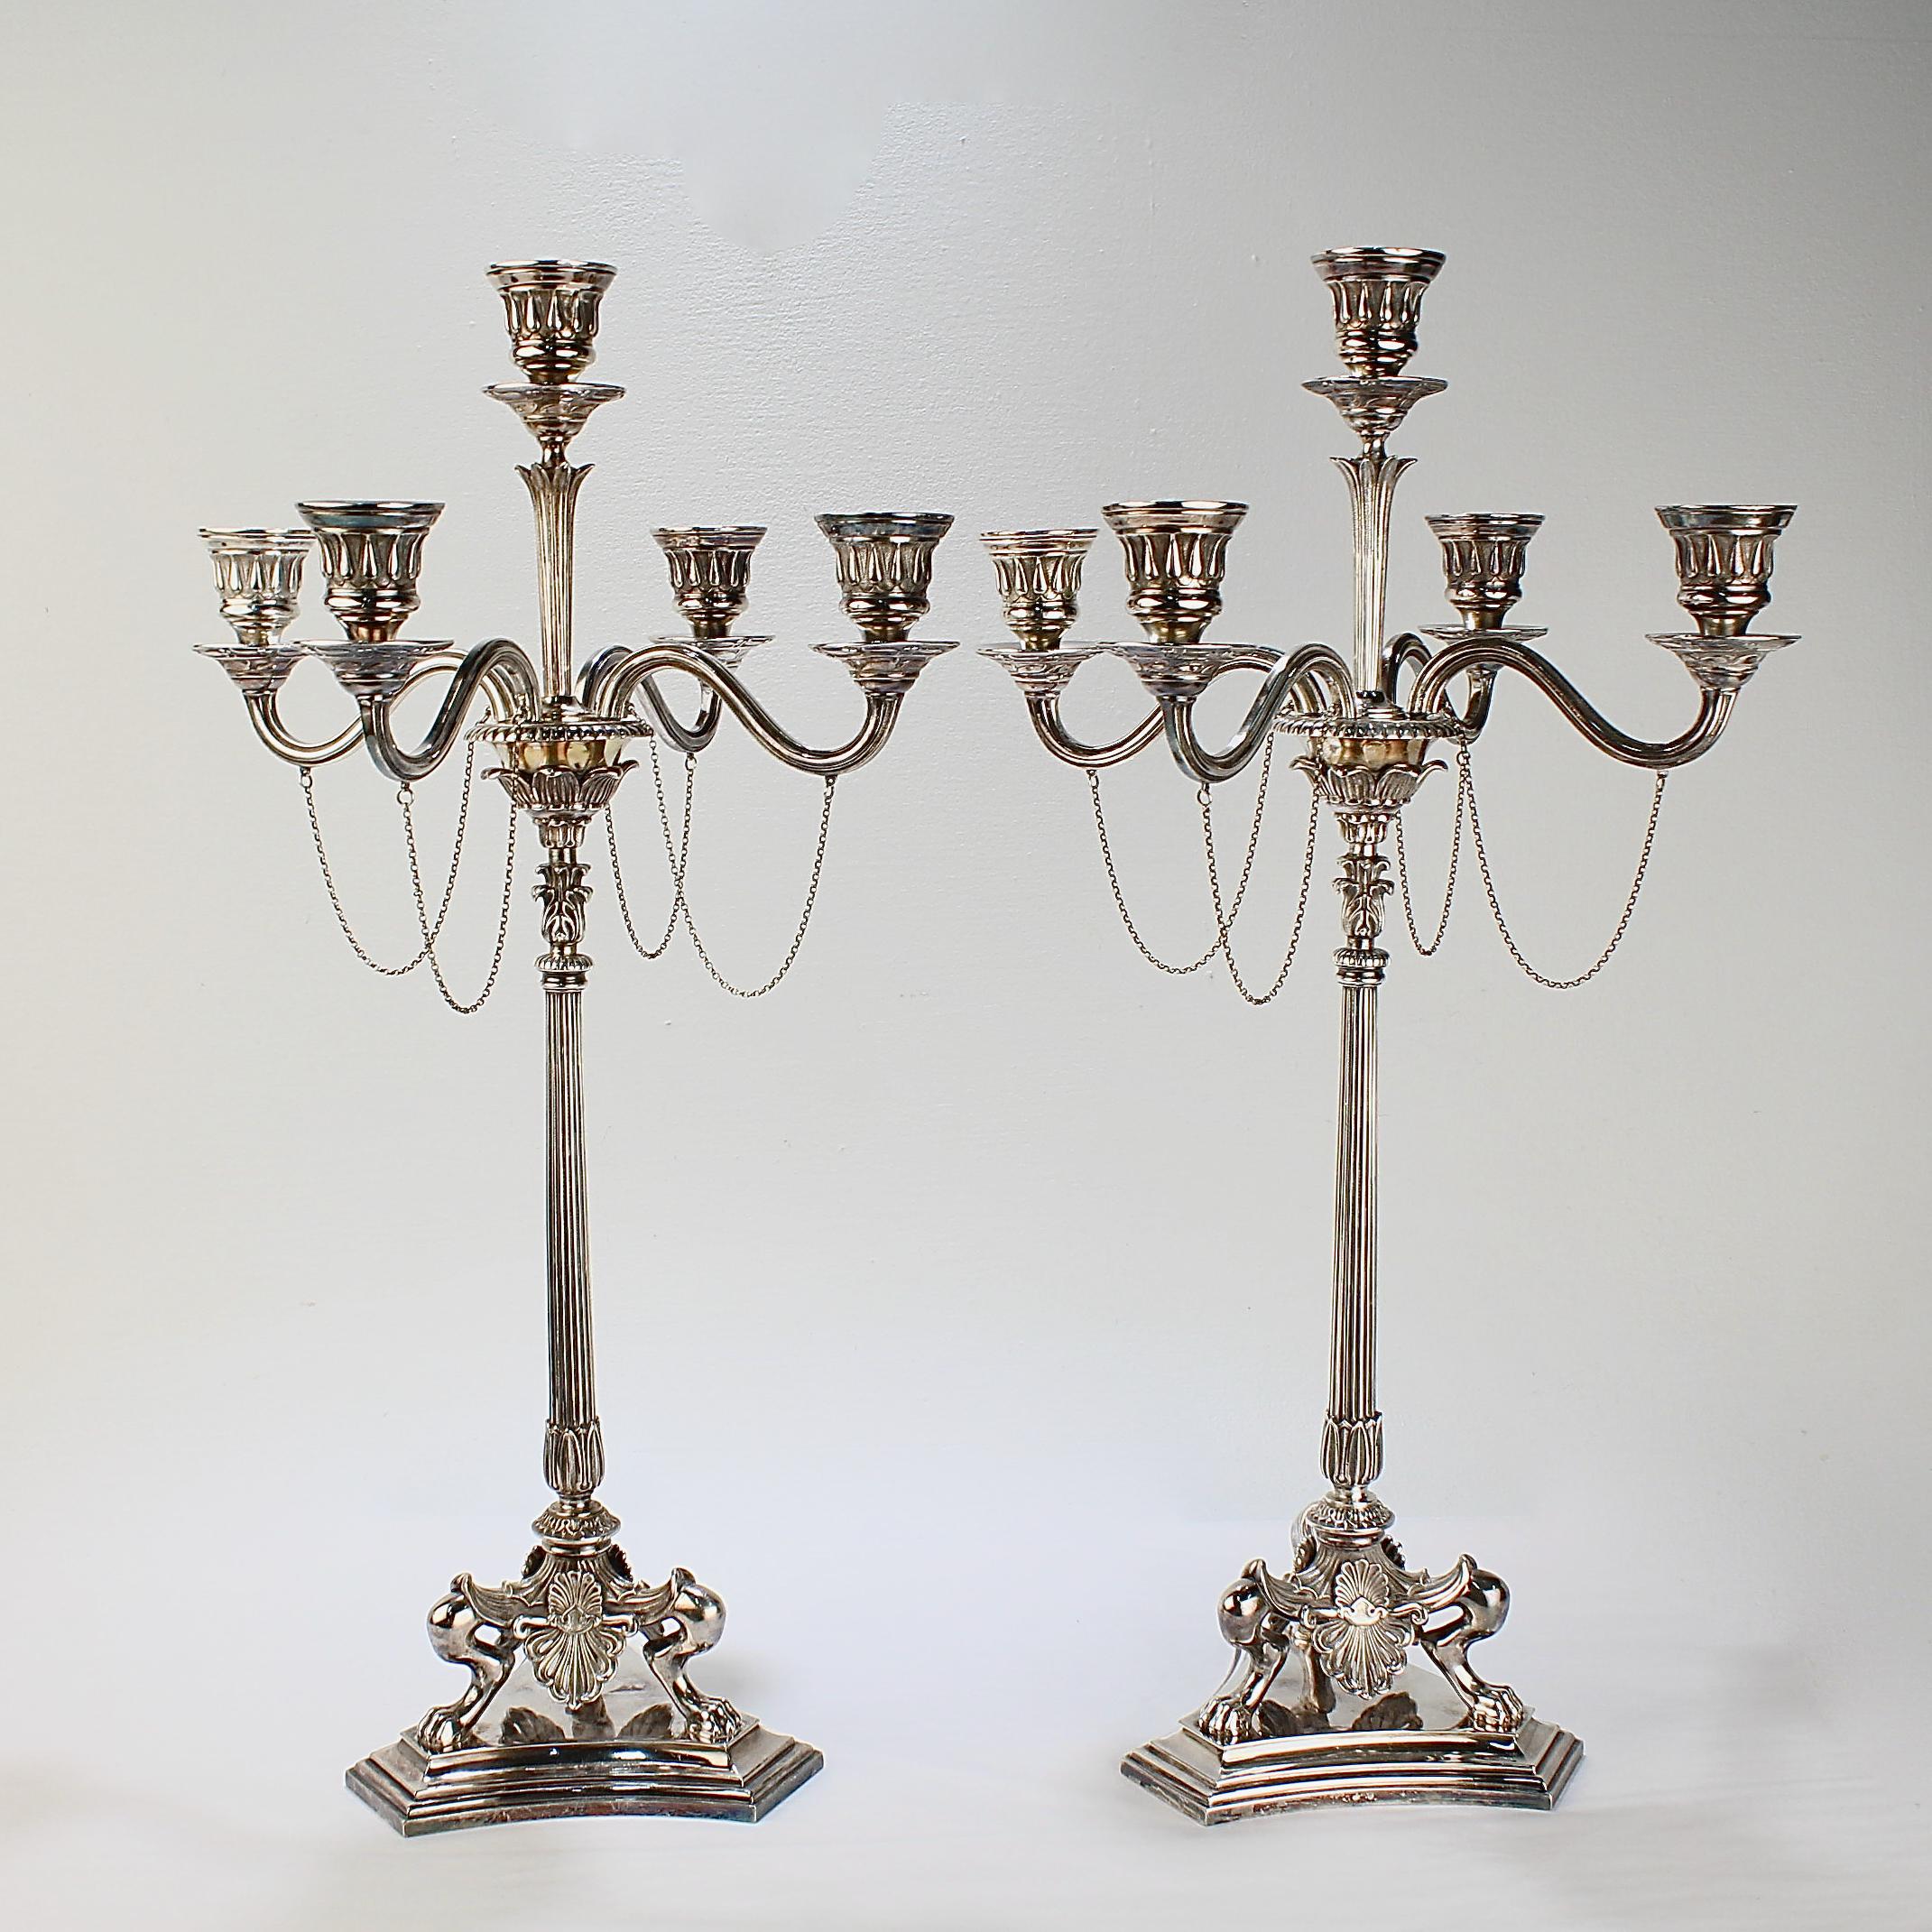 A rare pair of Victorian Neoclassical Revival silver plated candelabra by Elkington & Co.

Each candelabrum has a fluted column that rests on three paw feet that also support anthemion aprons. The feet are bolted to a stepped base.  

The central